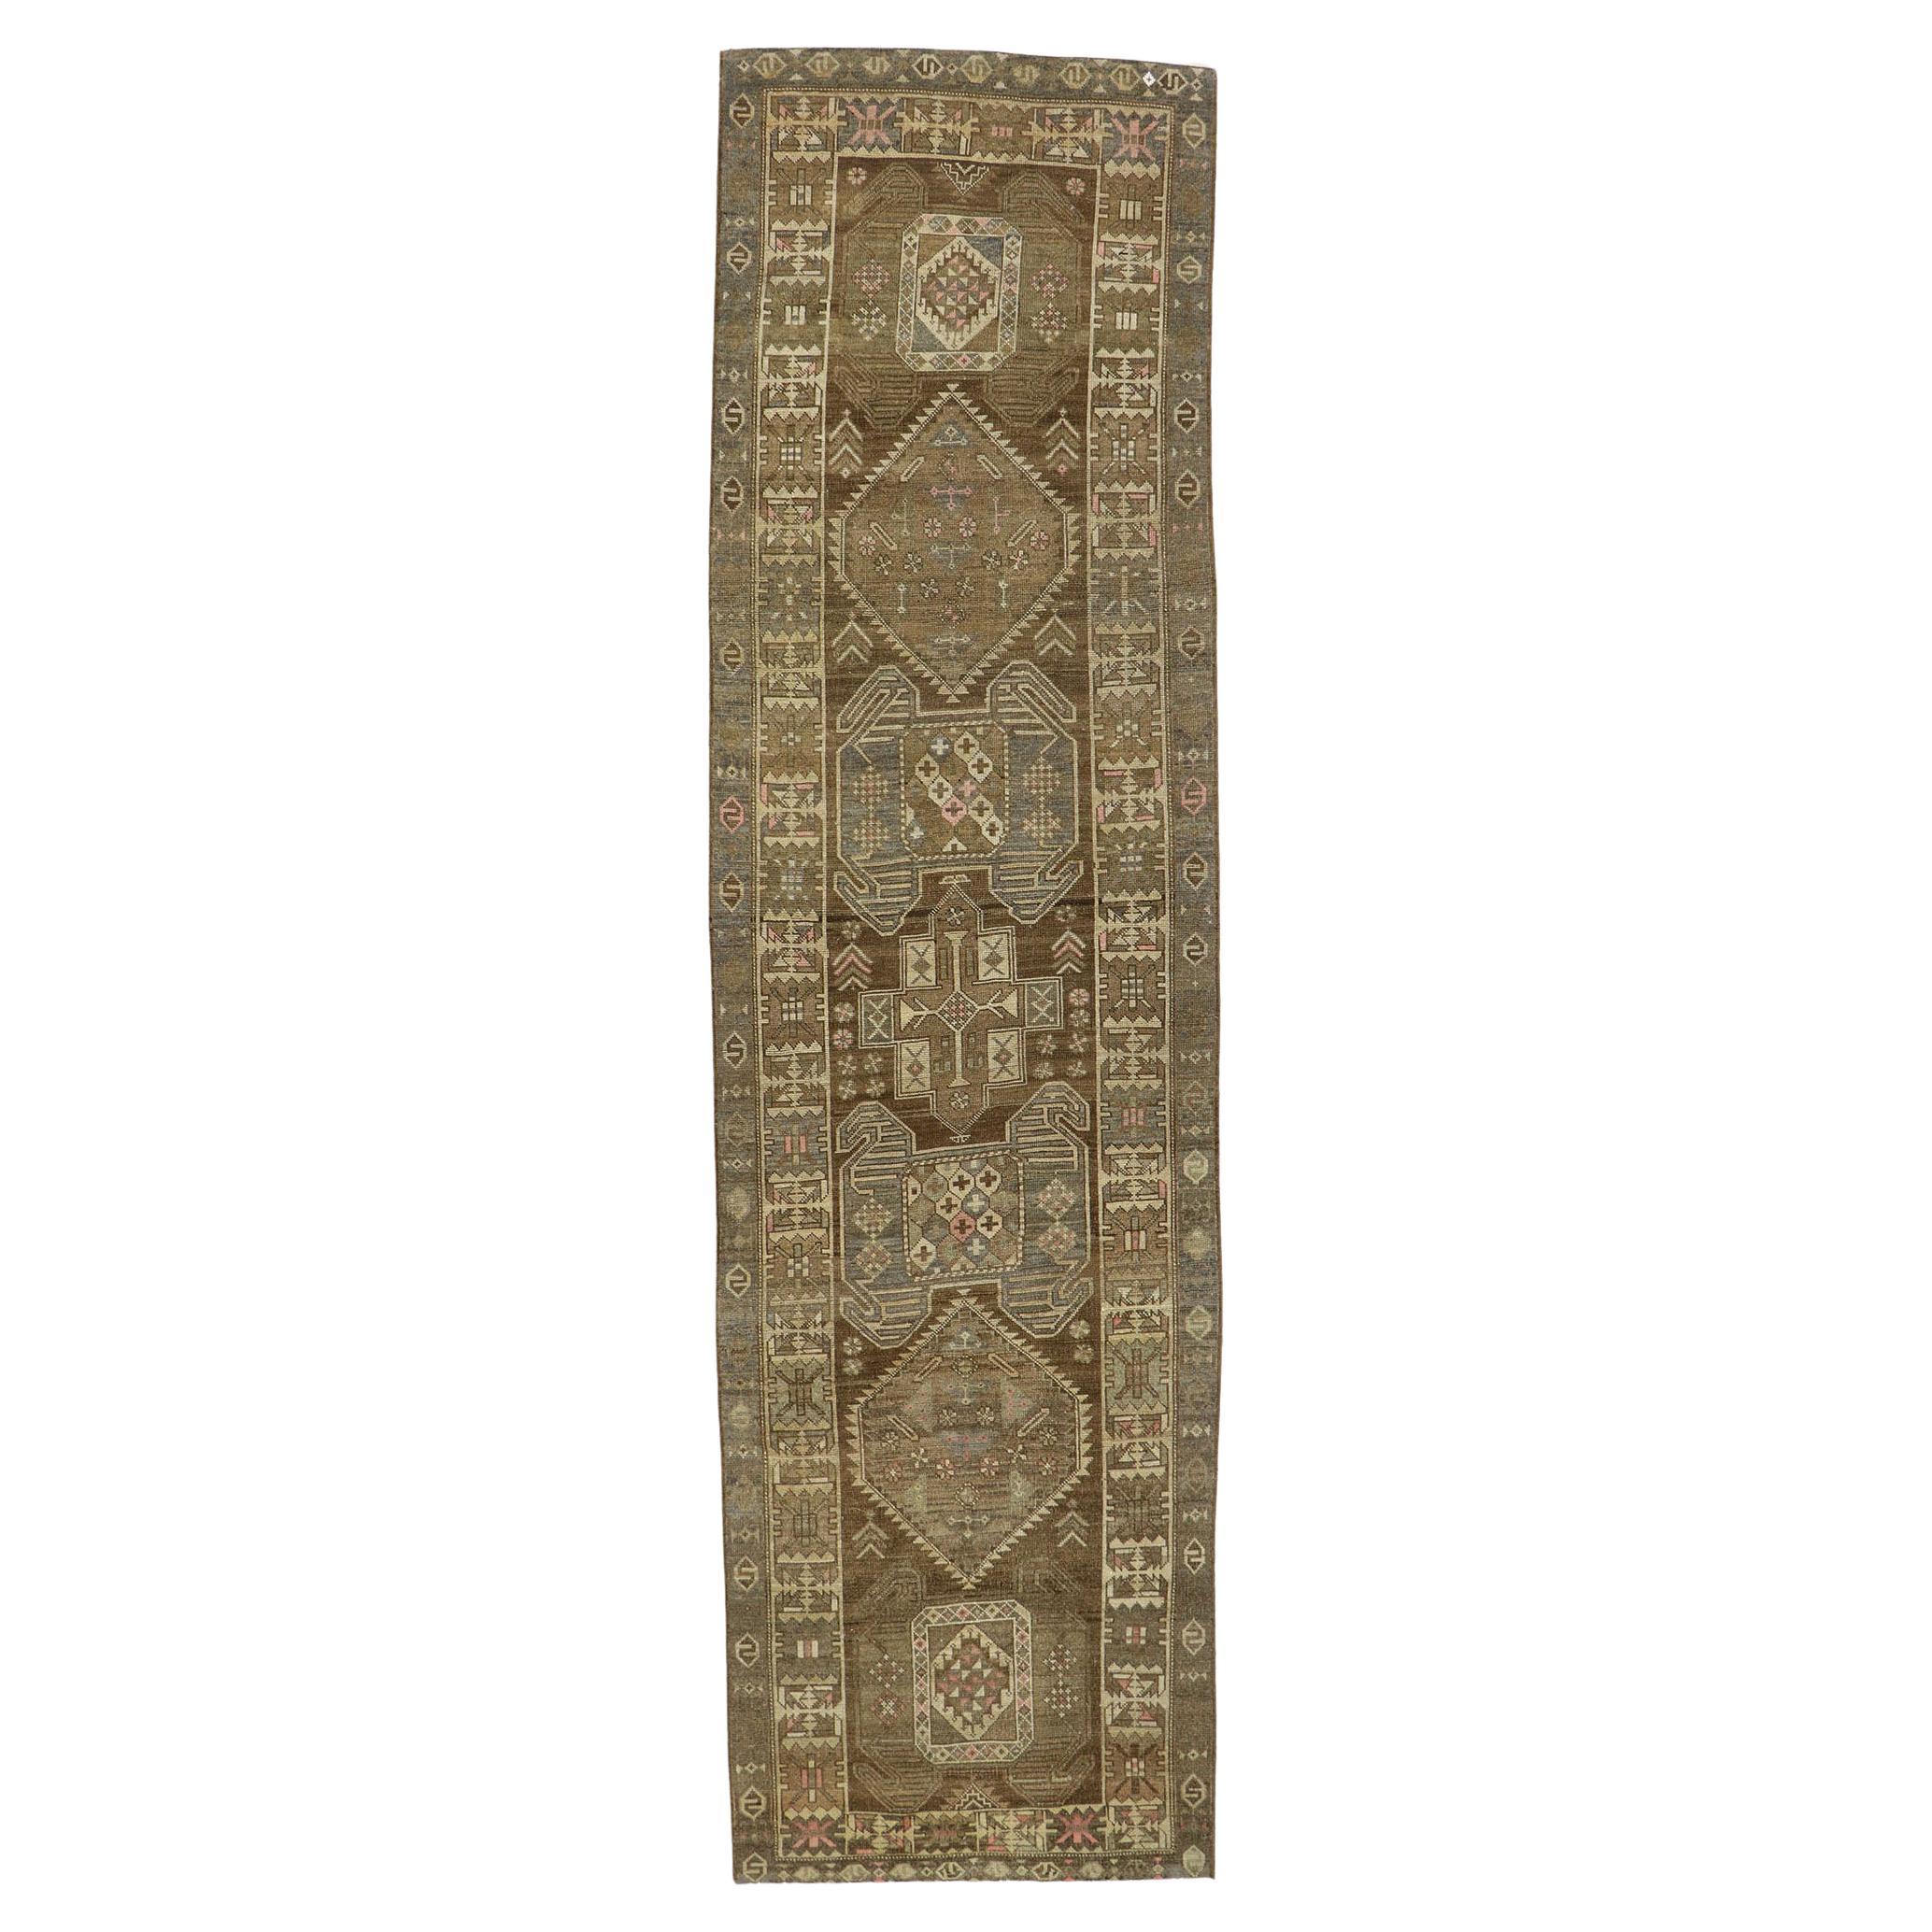 Antique Persian Azerbaijan Runner with Warm Tribal Style